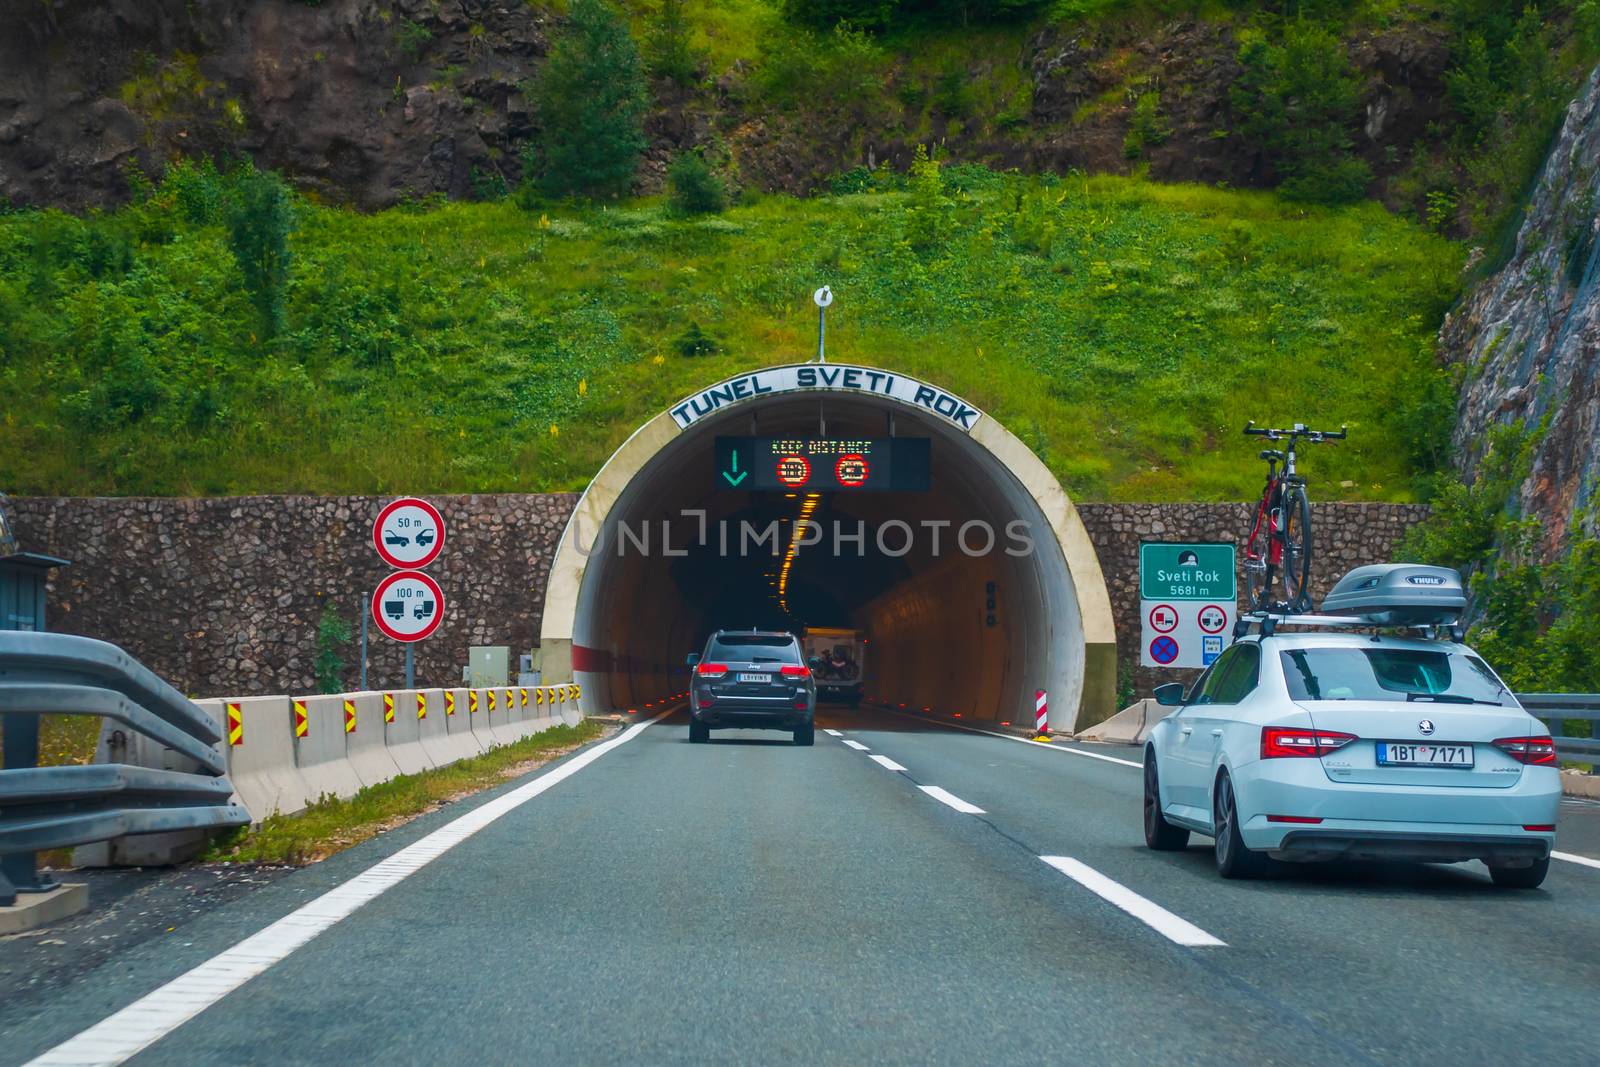 Entrance to the tunel Sveti Rok on Croatian Highway A1 between Zagreb and Zadar by asafaric